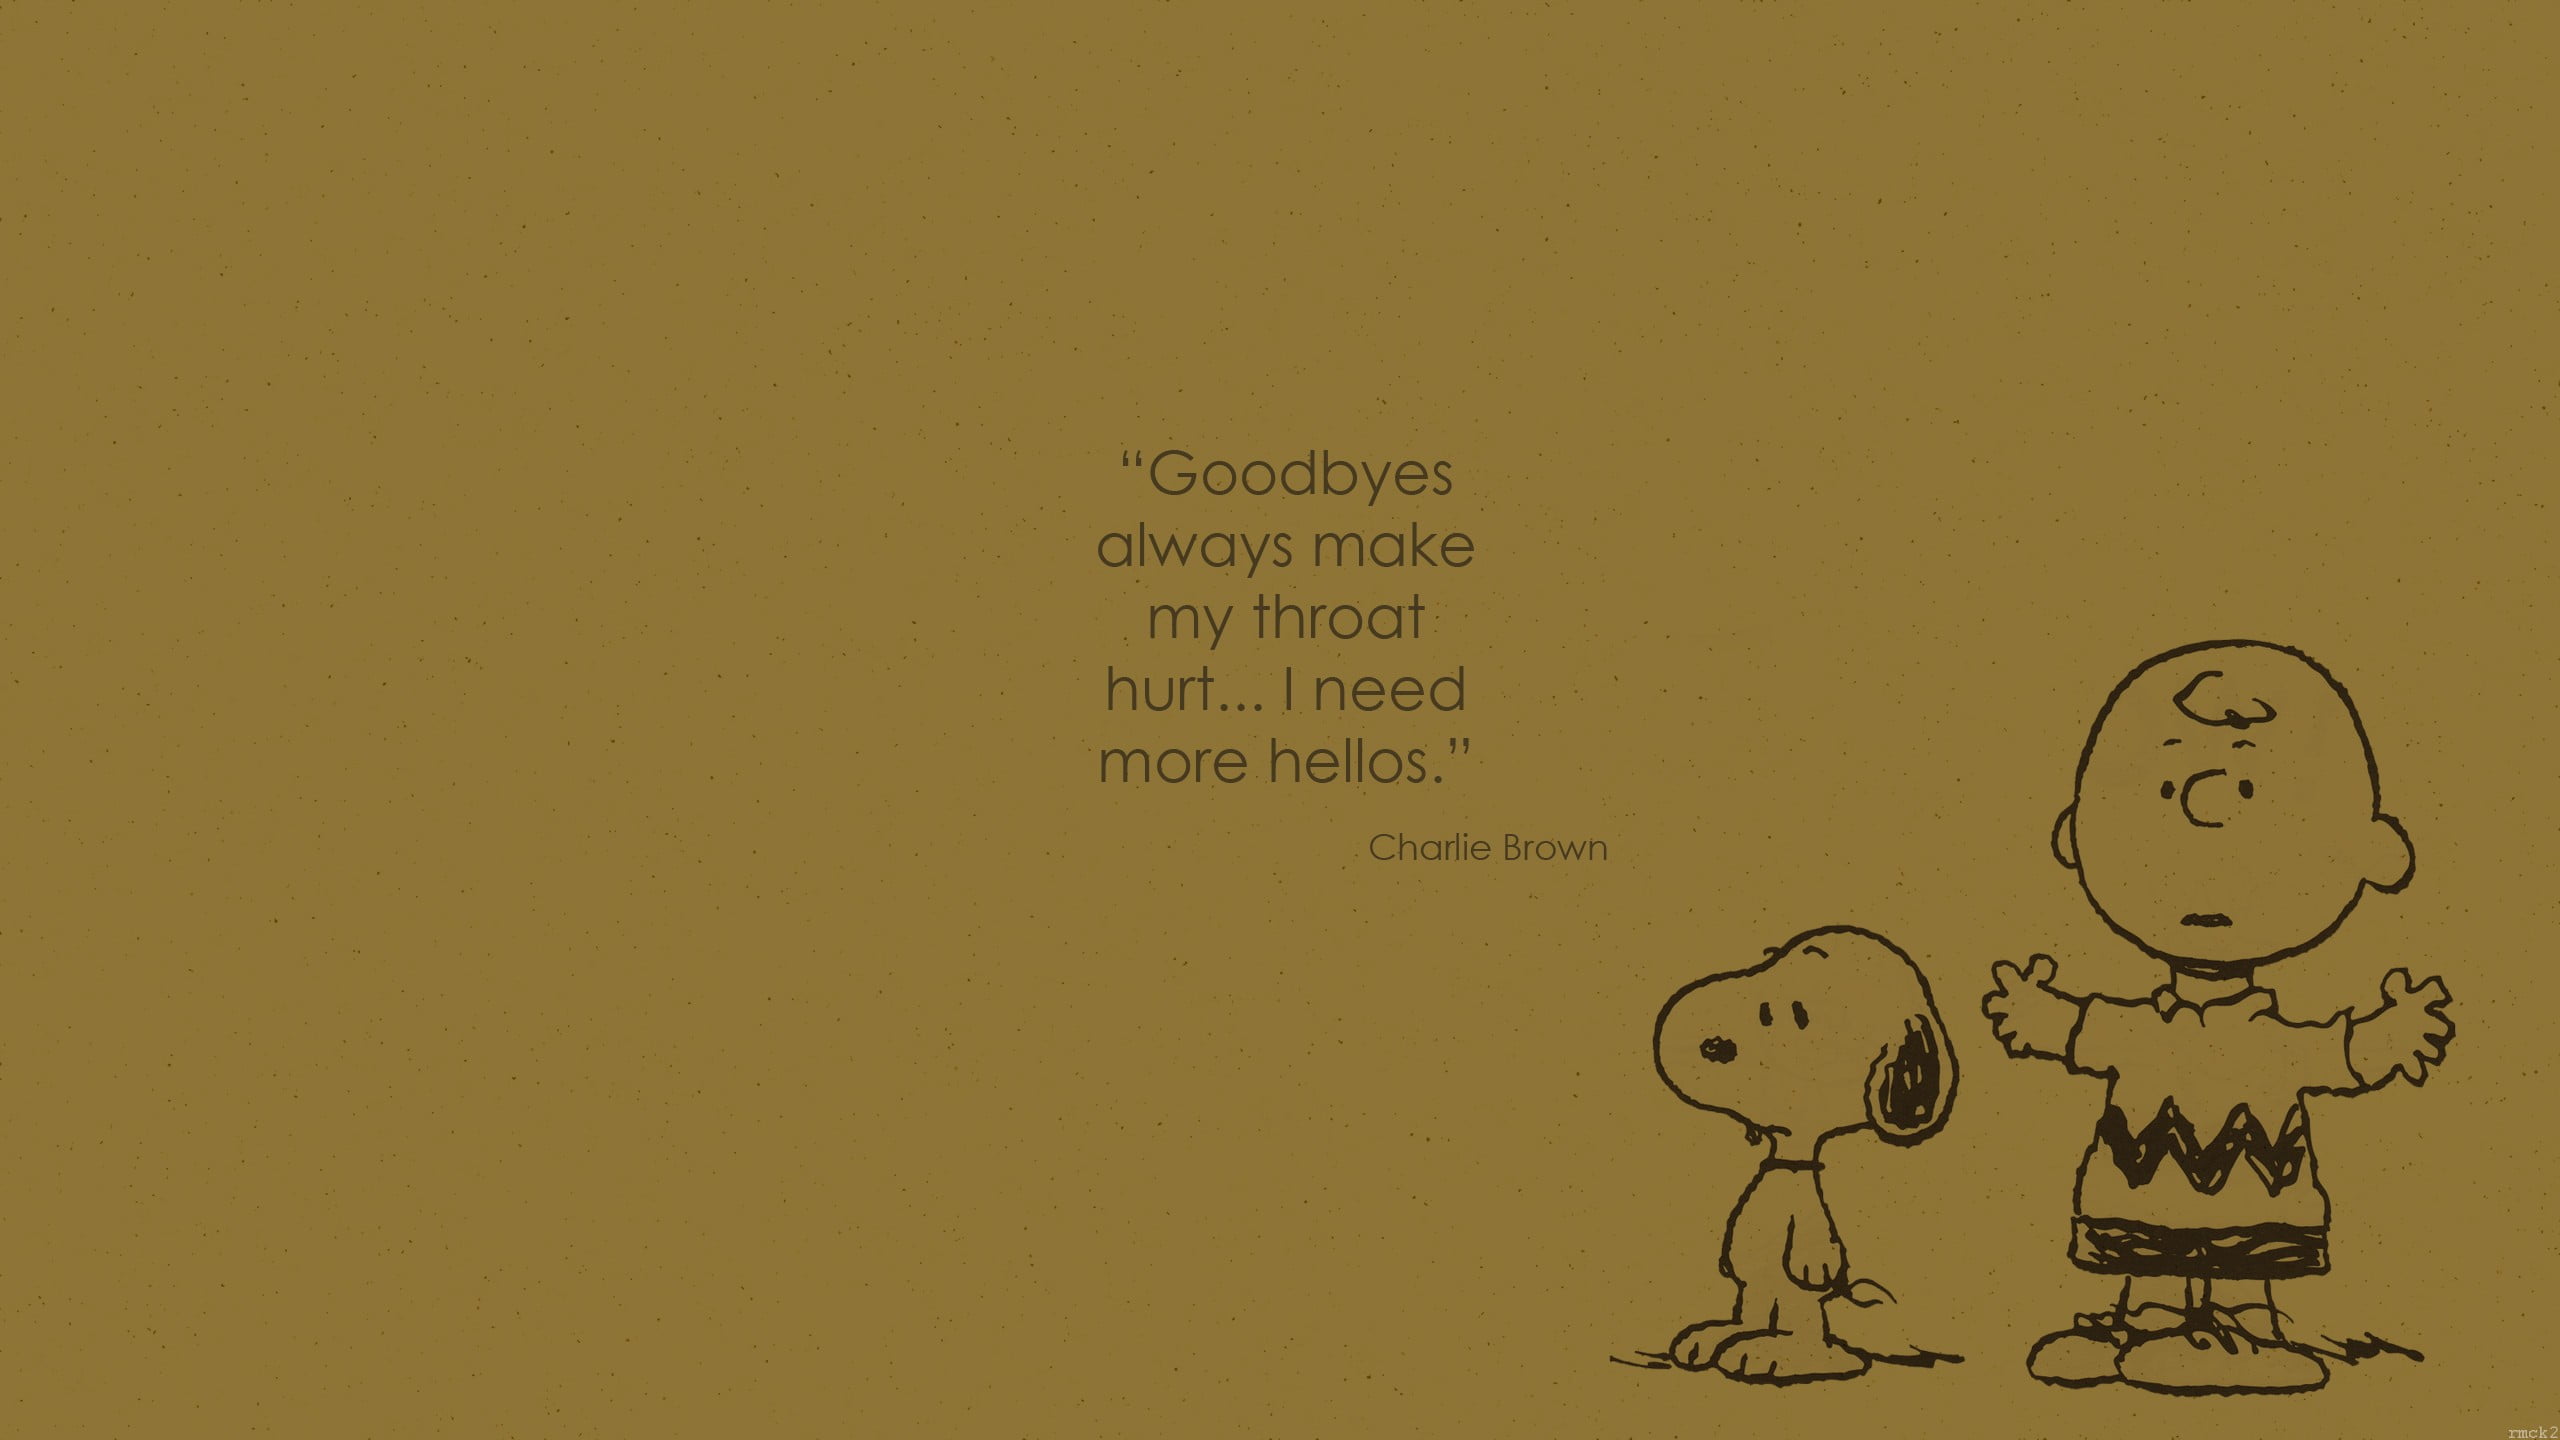 Charlie Brown And Snoopy Illustration Snoopy Charlie Brown Quote Peanuts Comic Hd Wallpaper Wallpaper Flare